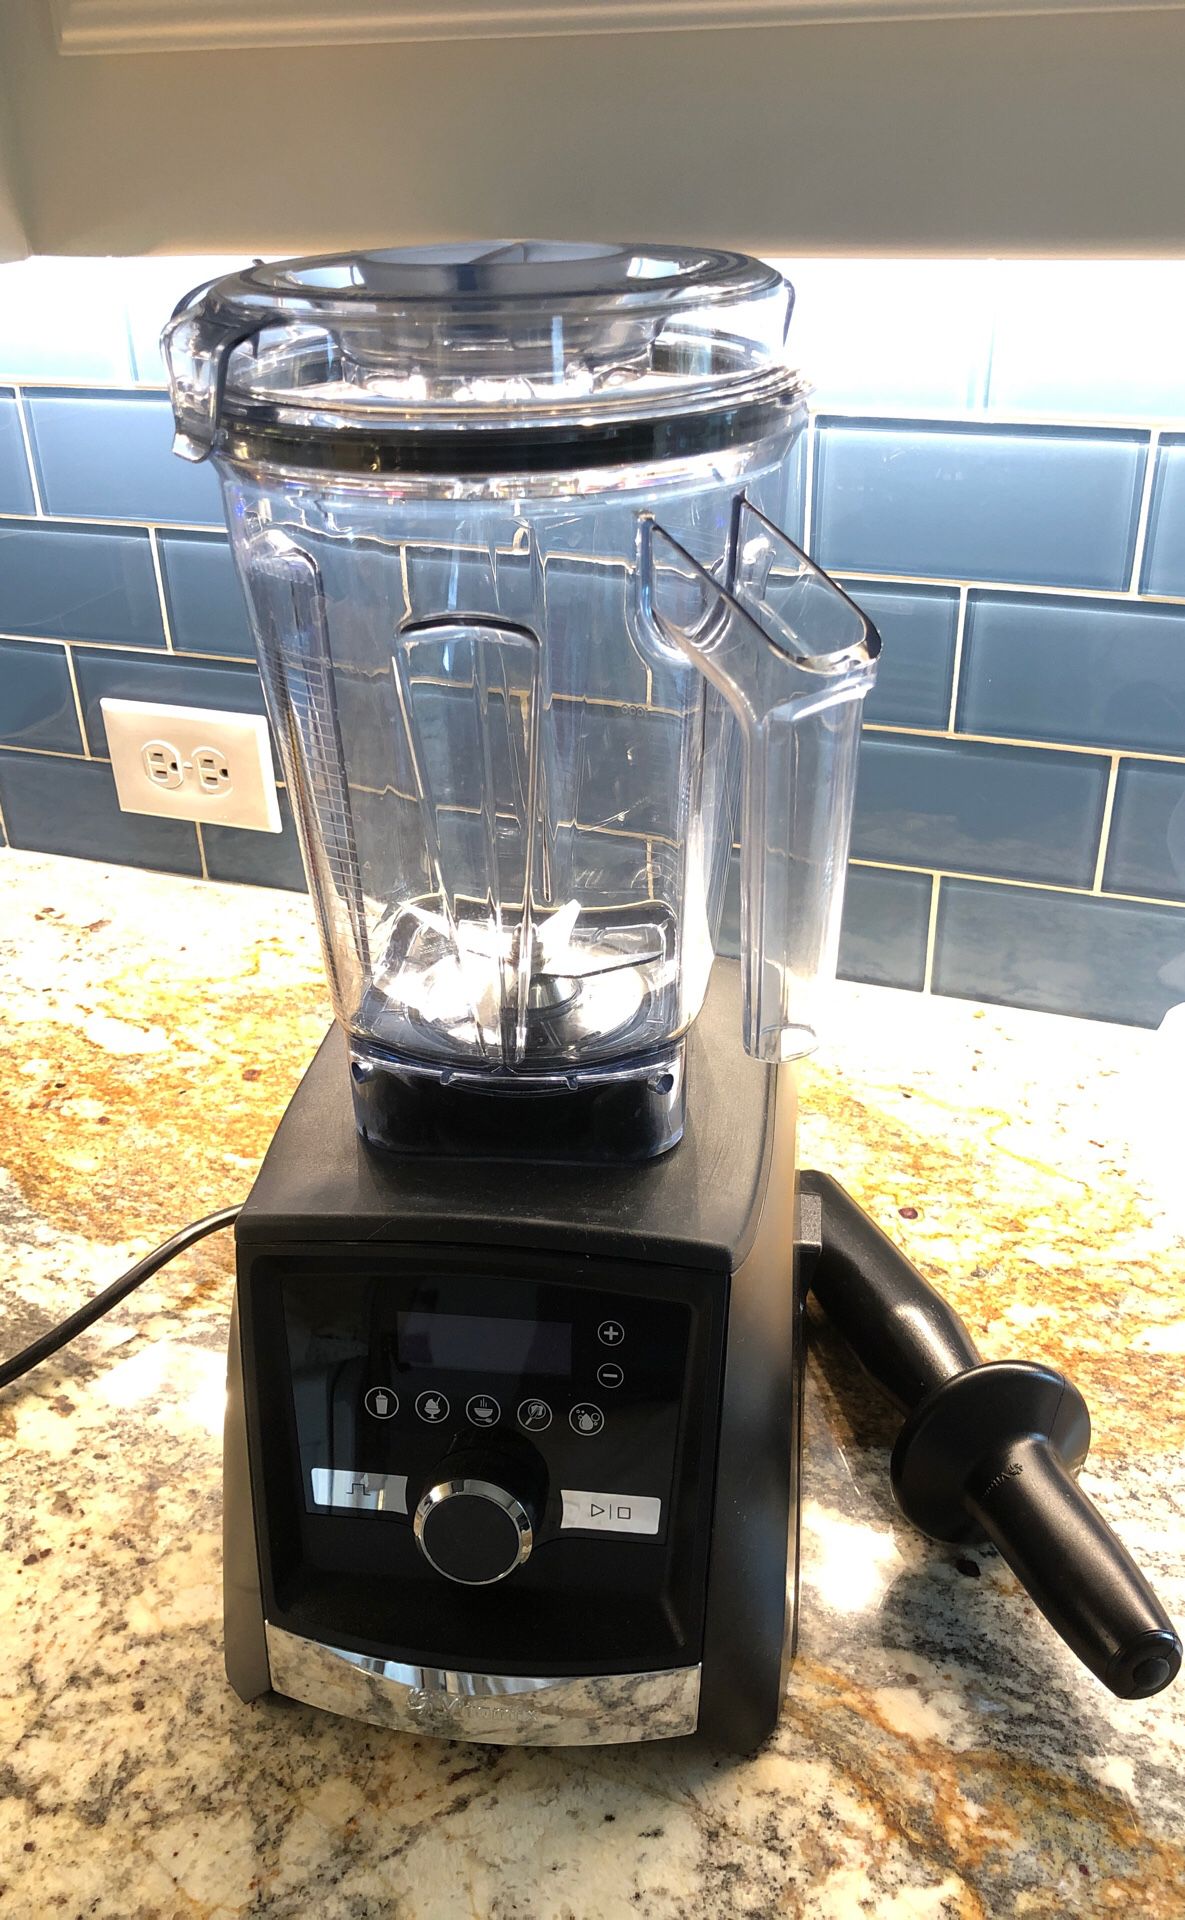 Vitamix A3500 Blender for Sale in Frisco, TX - OfferUp